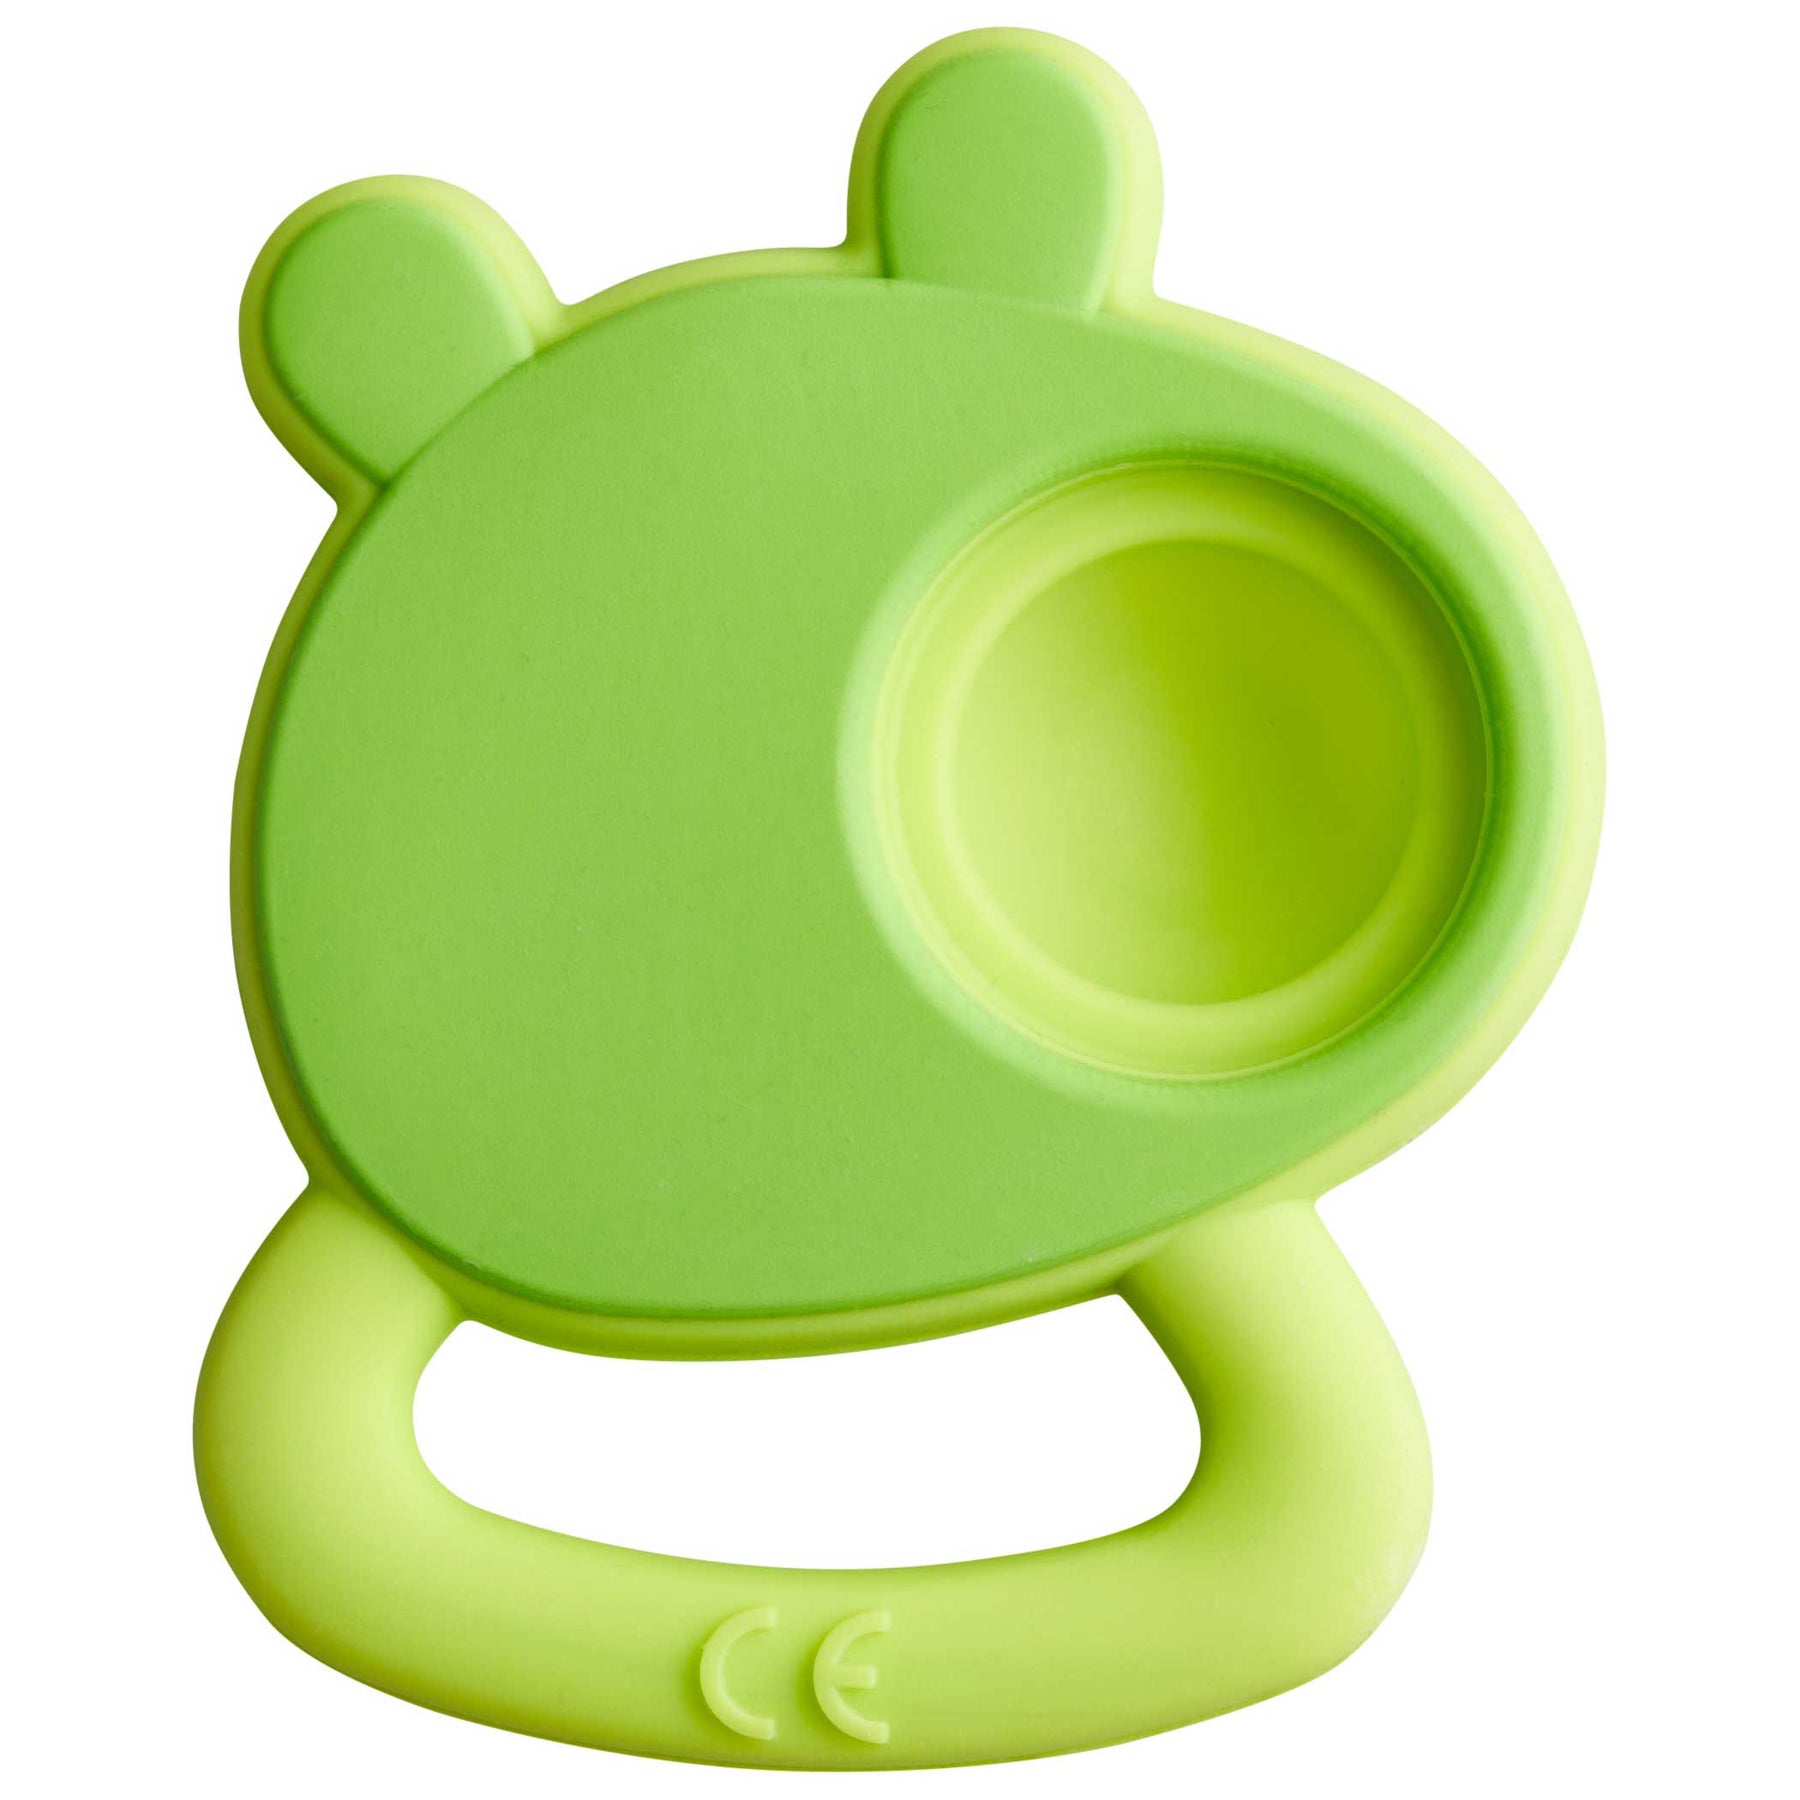 Haba Wooden Clips Green